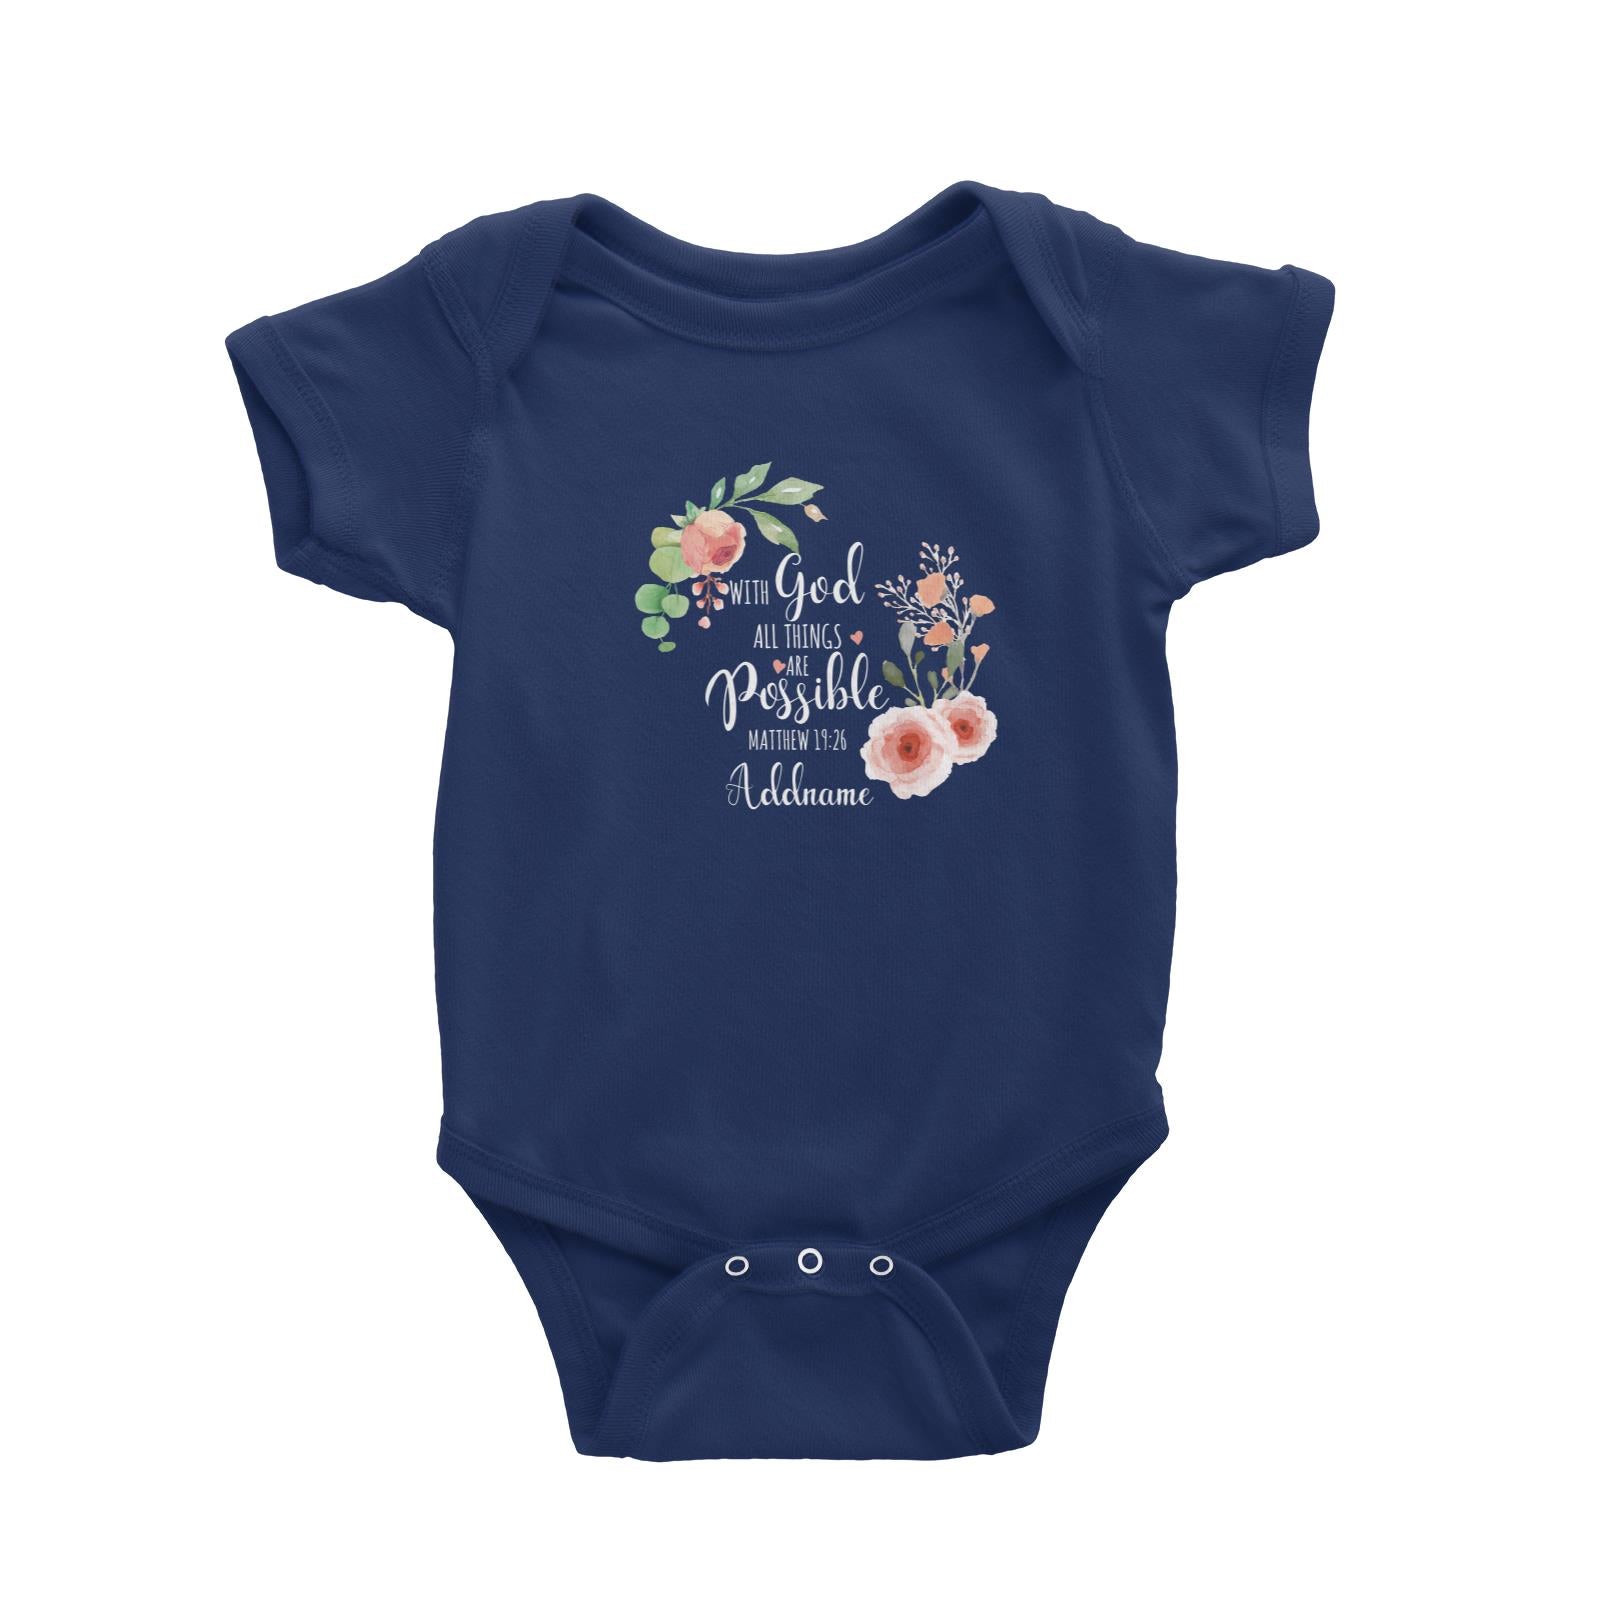 Gods Gift With God All Things Are Possible Matthew 19.26 Addname Baby Romper